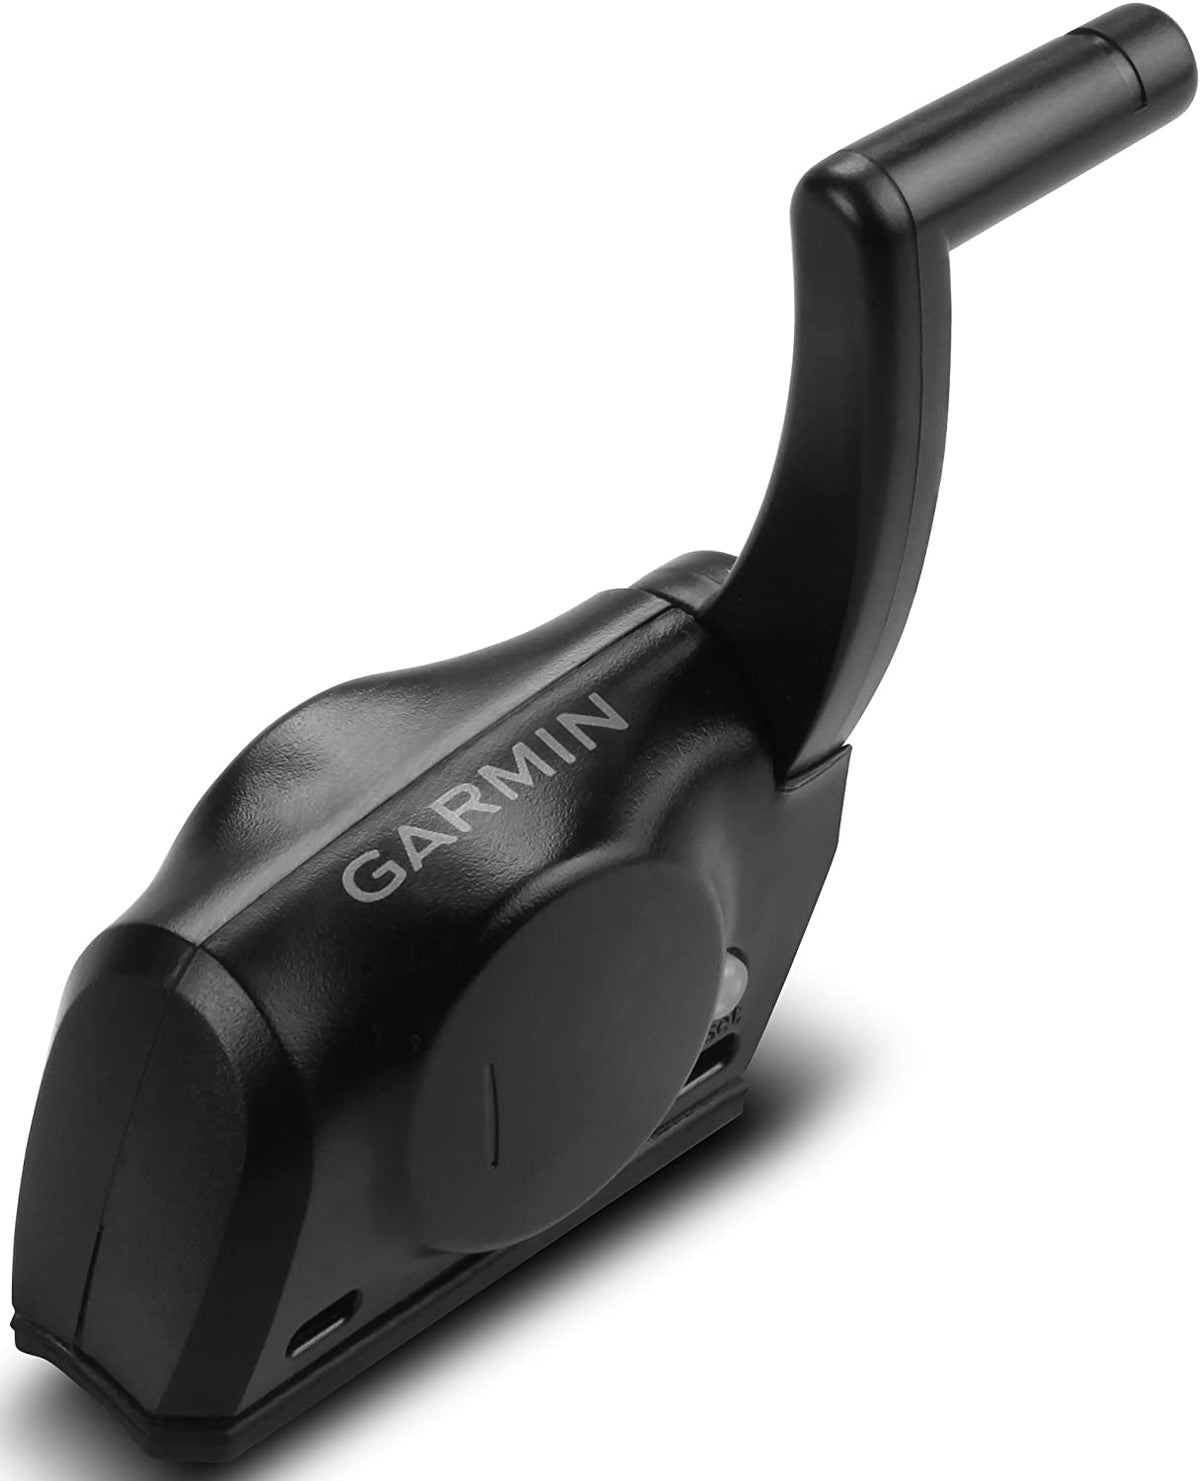 Garmin GSC10 speed and cadence sensor - Old Style